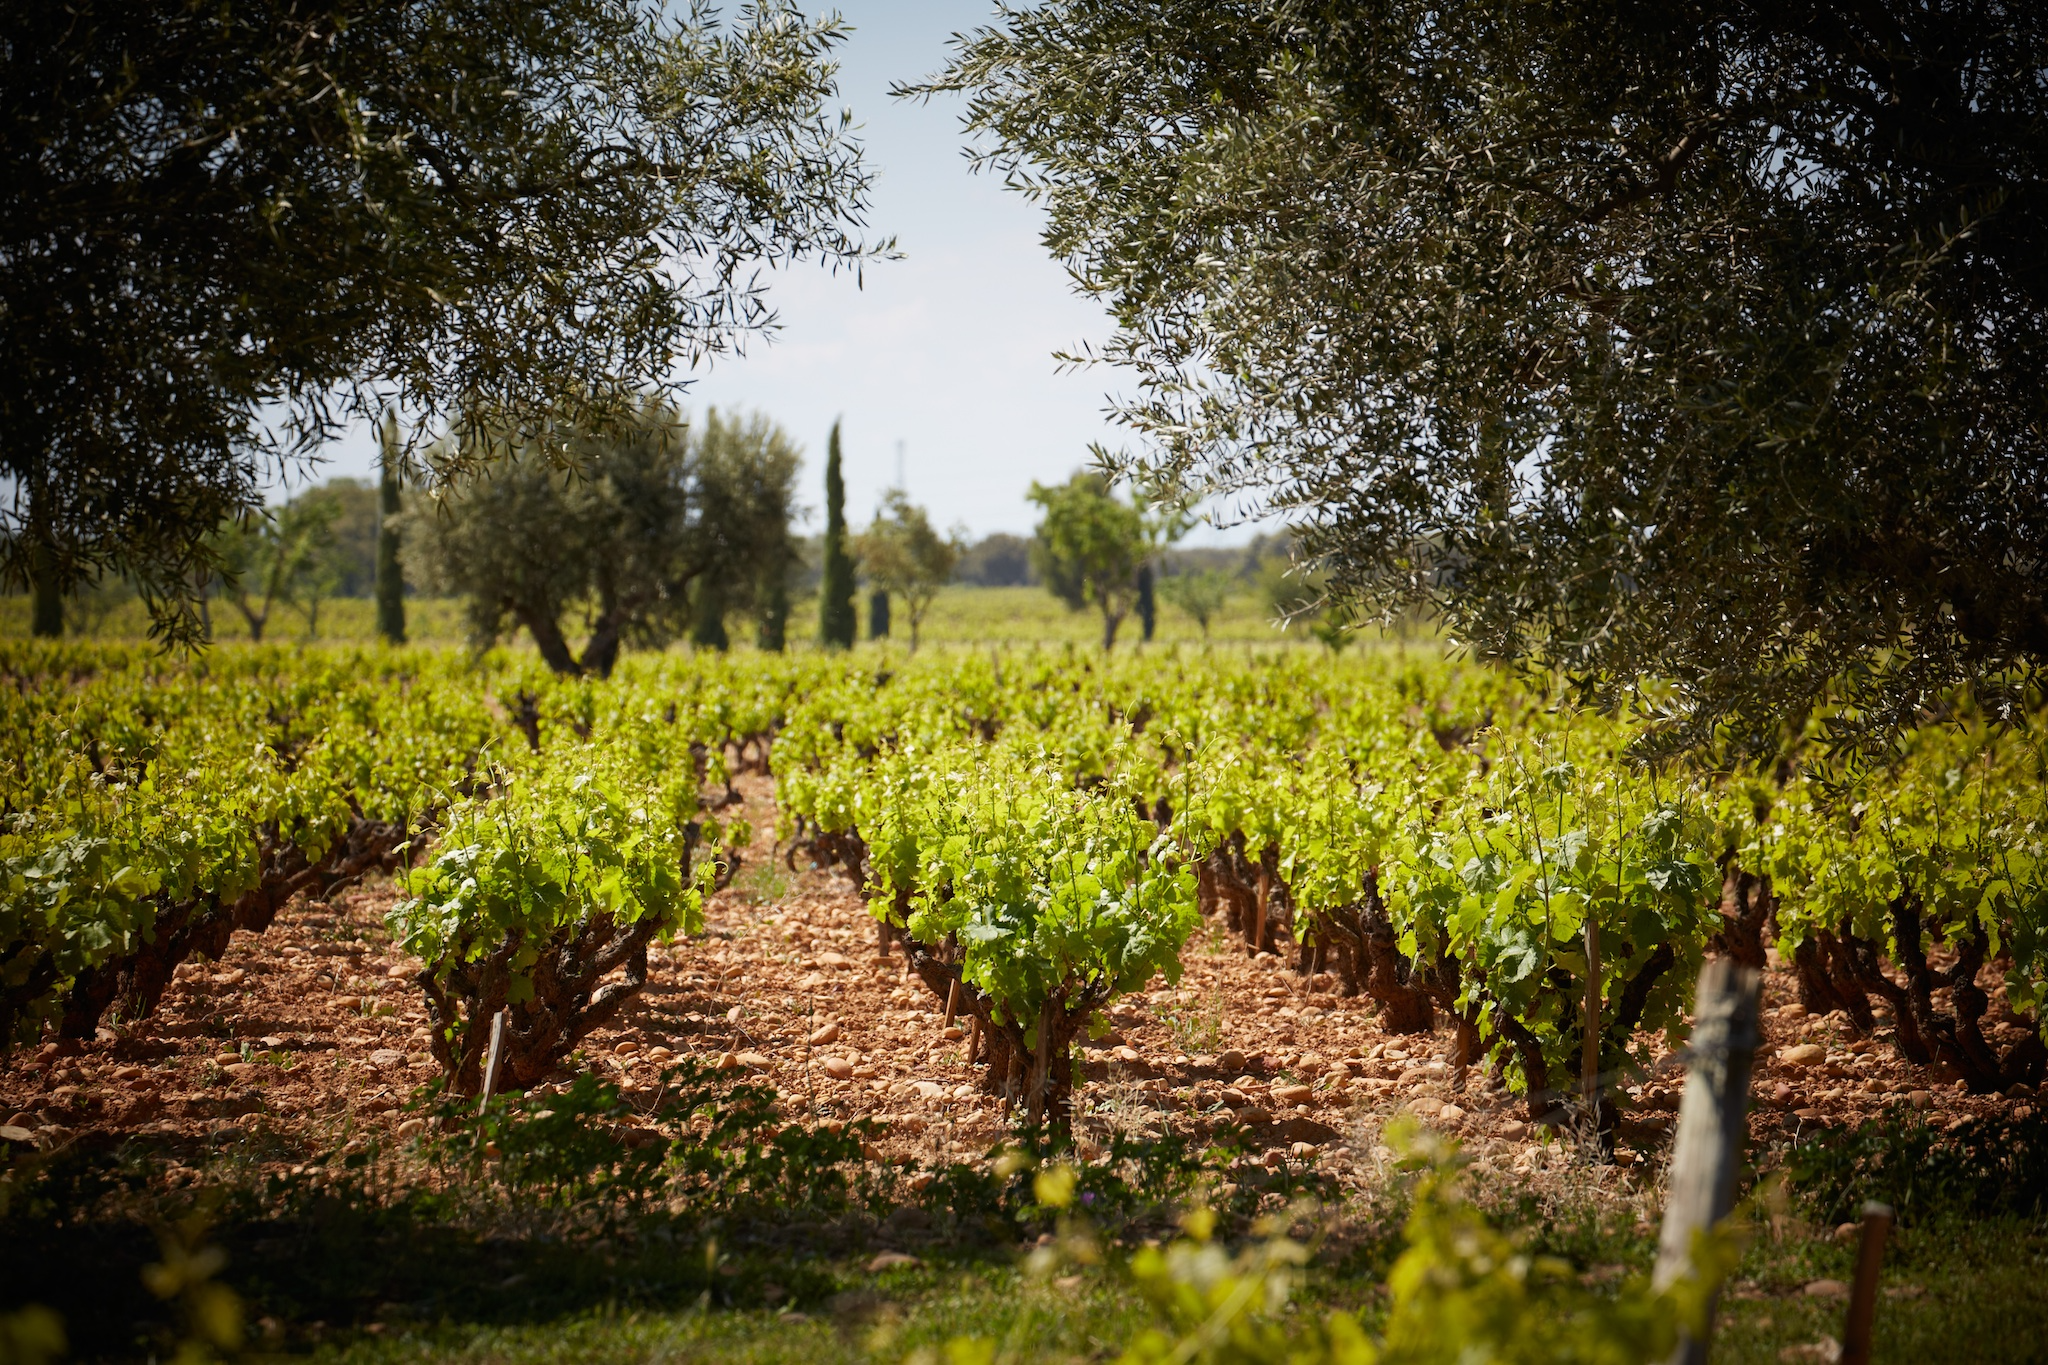 The vineyard specialises in Châteauneuf-du-Pape wines, a grenache based red blend